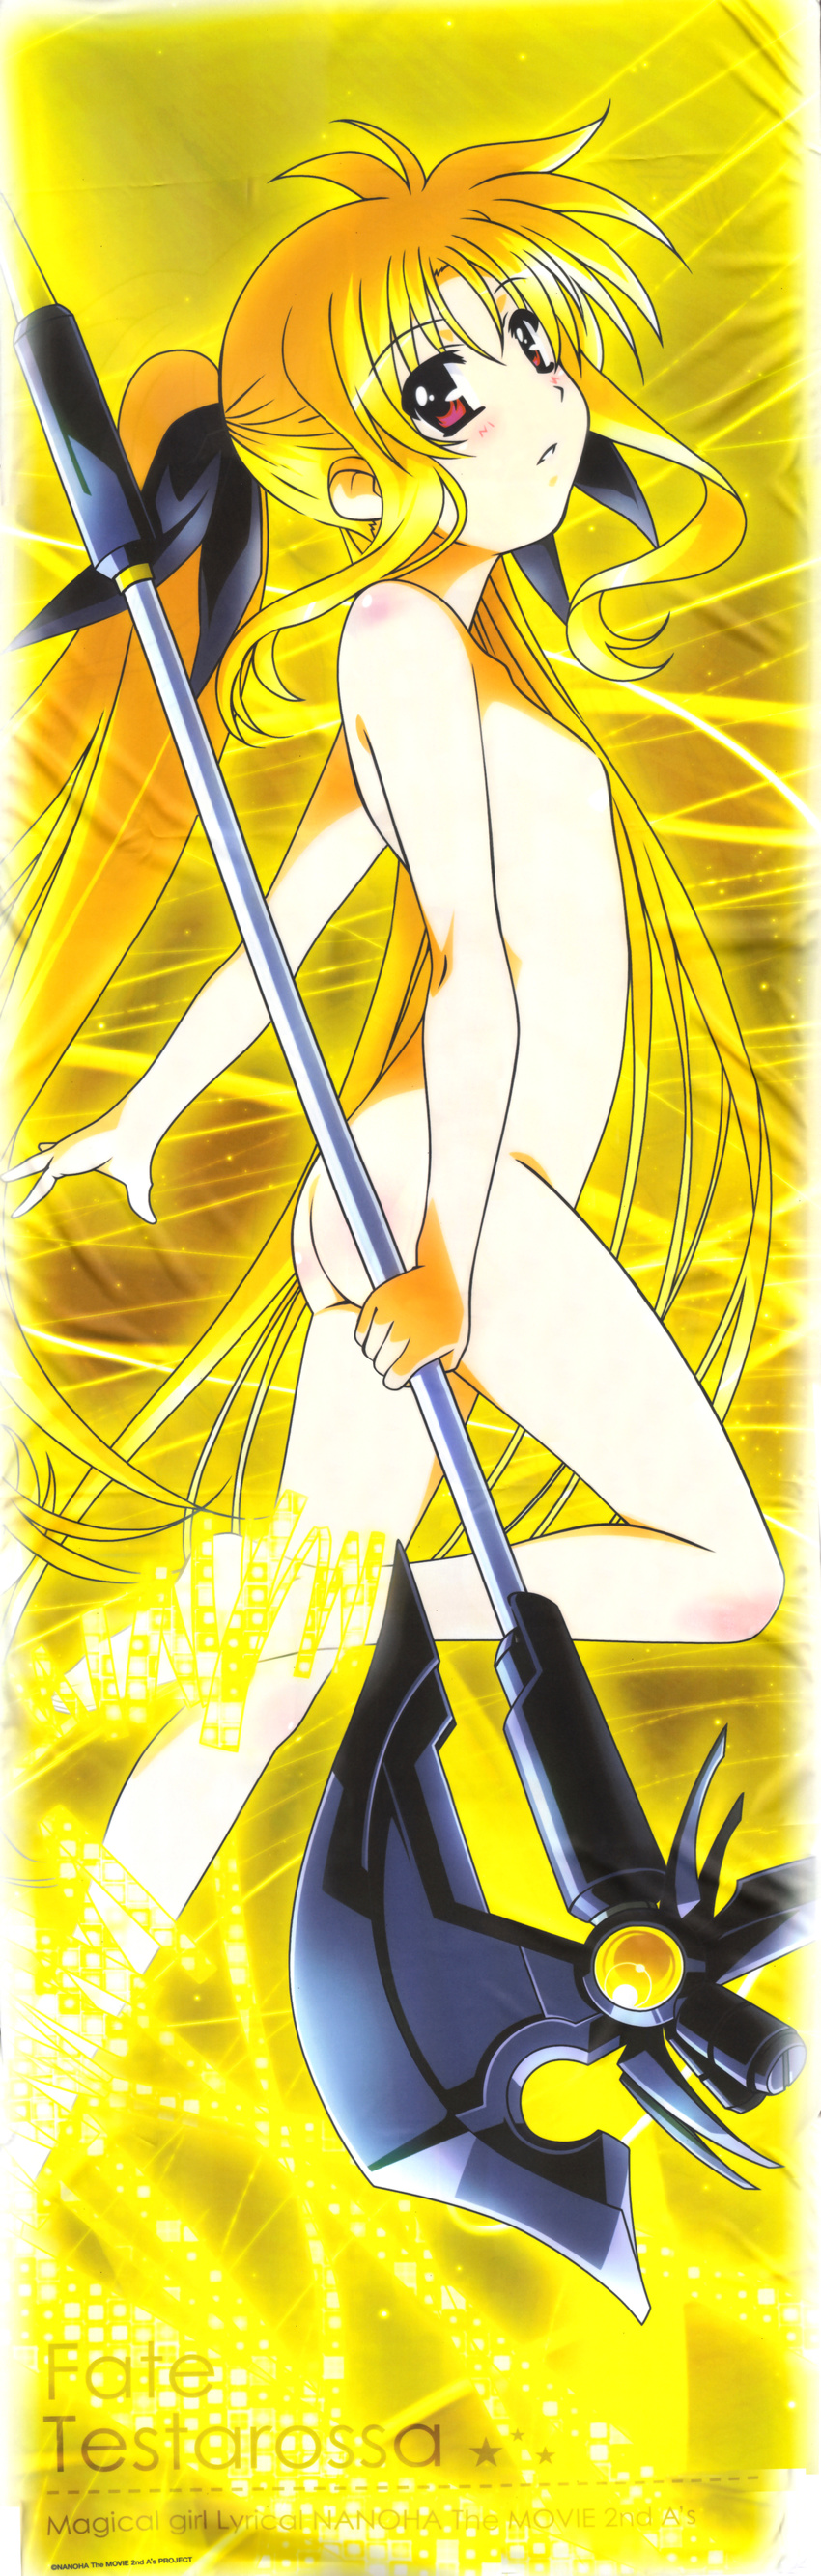 1girl absurdres ass bardiche blonde_hair blush bow character_name copyright_name crease dakimakura fate_testarossa feet flat_chest hair_bow highres incredibly_absurdres long_hair long_image lyrical_nanoha mahou_shoujo_lyrical_nanoha mahou_shoujo_lyrical_nanoha_a's mahou_shoujo_lyrical_nanoha_a's mahou_shoujo_lyrical_nanoha_the_movie_2nd_a's mahou_shoujo_lyrical_nanoha_the_movie_2nd_a's no_nipples nude red_eyes scan scythe solo star tall_image title_drop transformation twintails